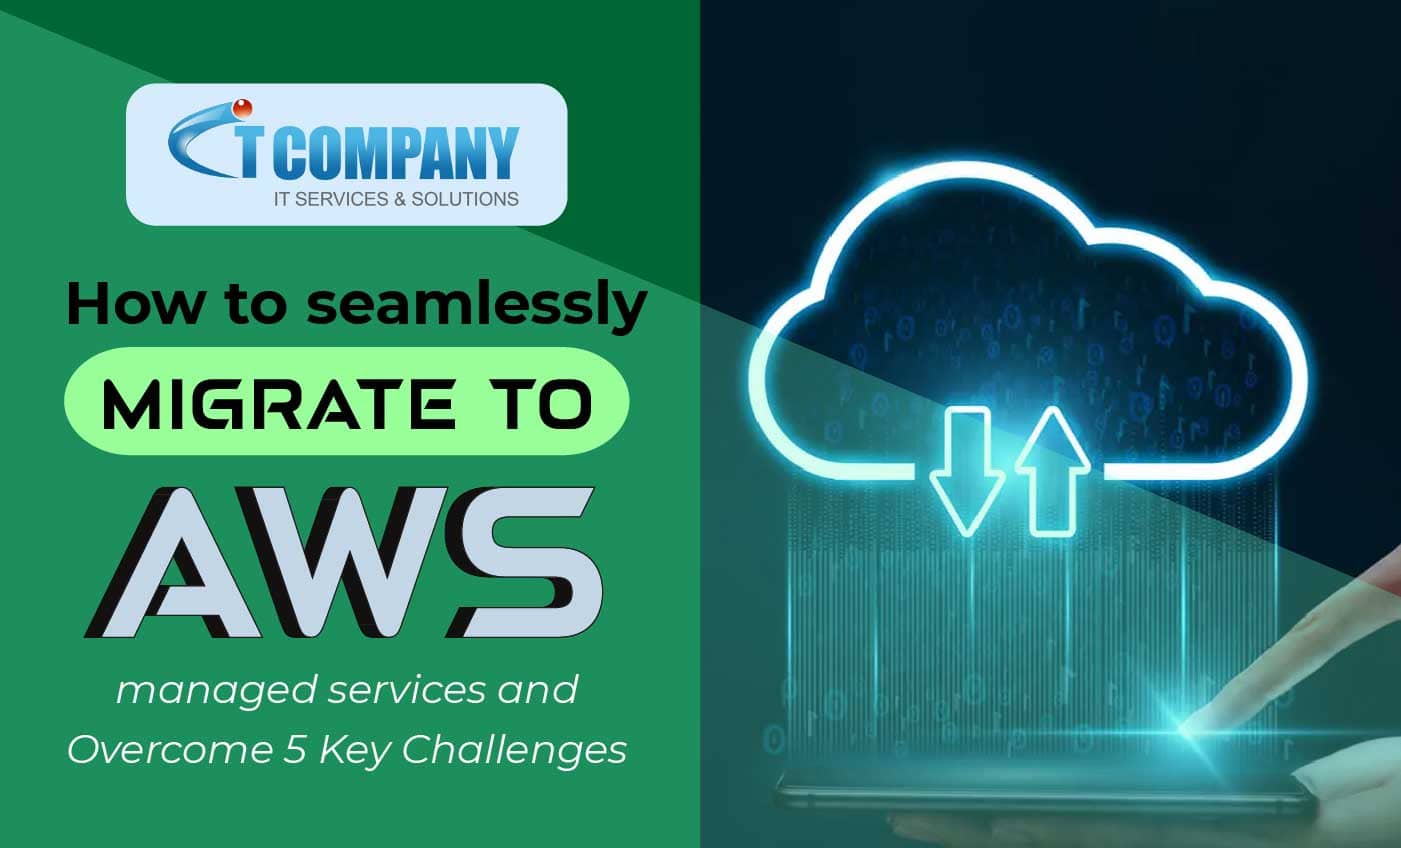 How to Seamlessly Migrate to AWS: Overcoming 5 Key Challenges